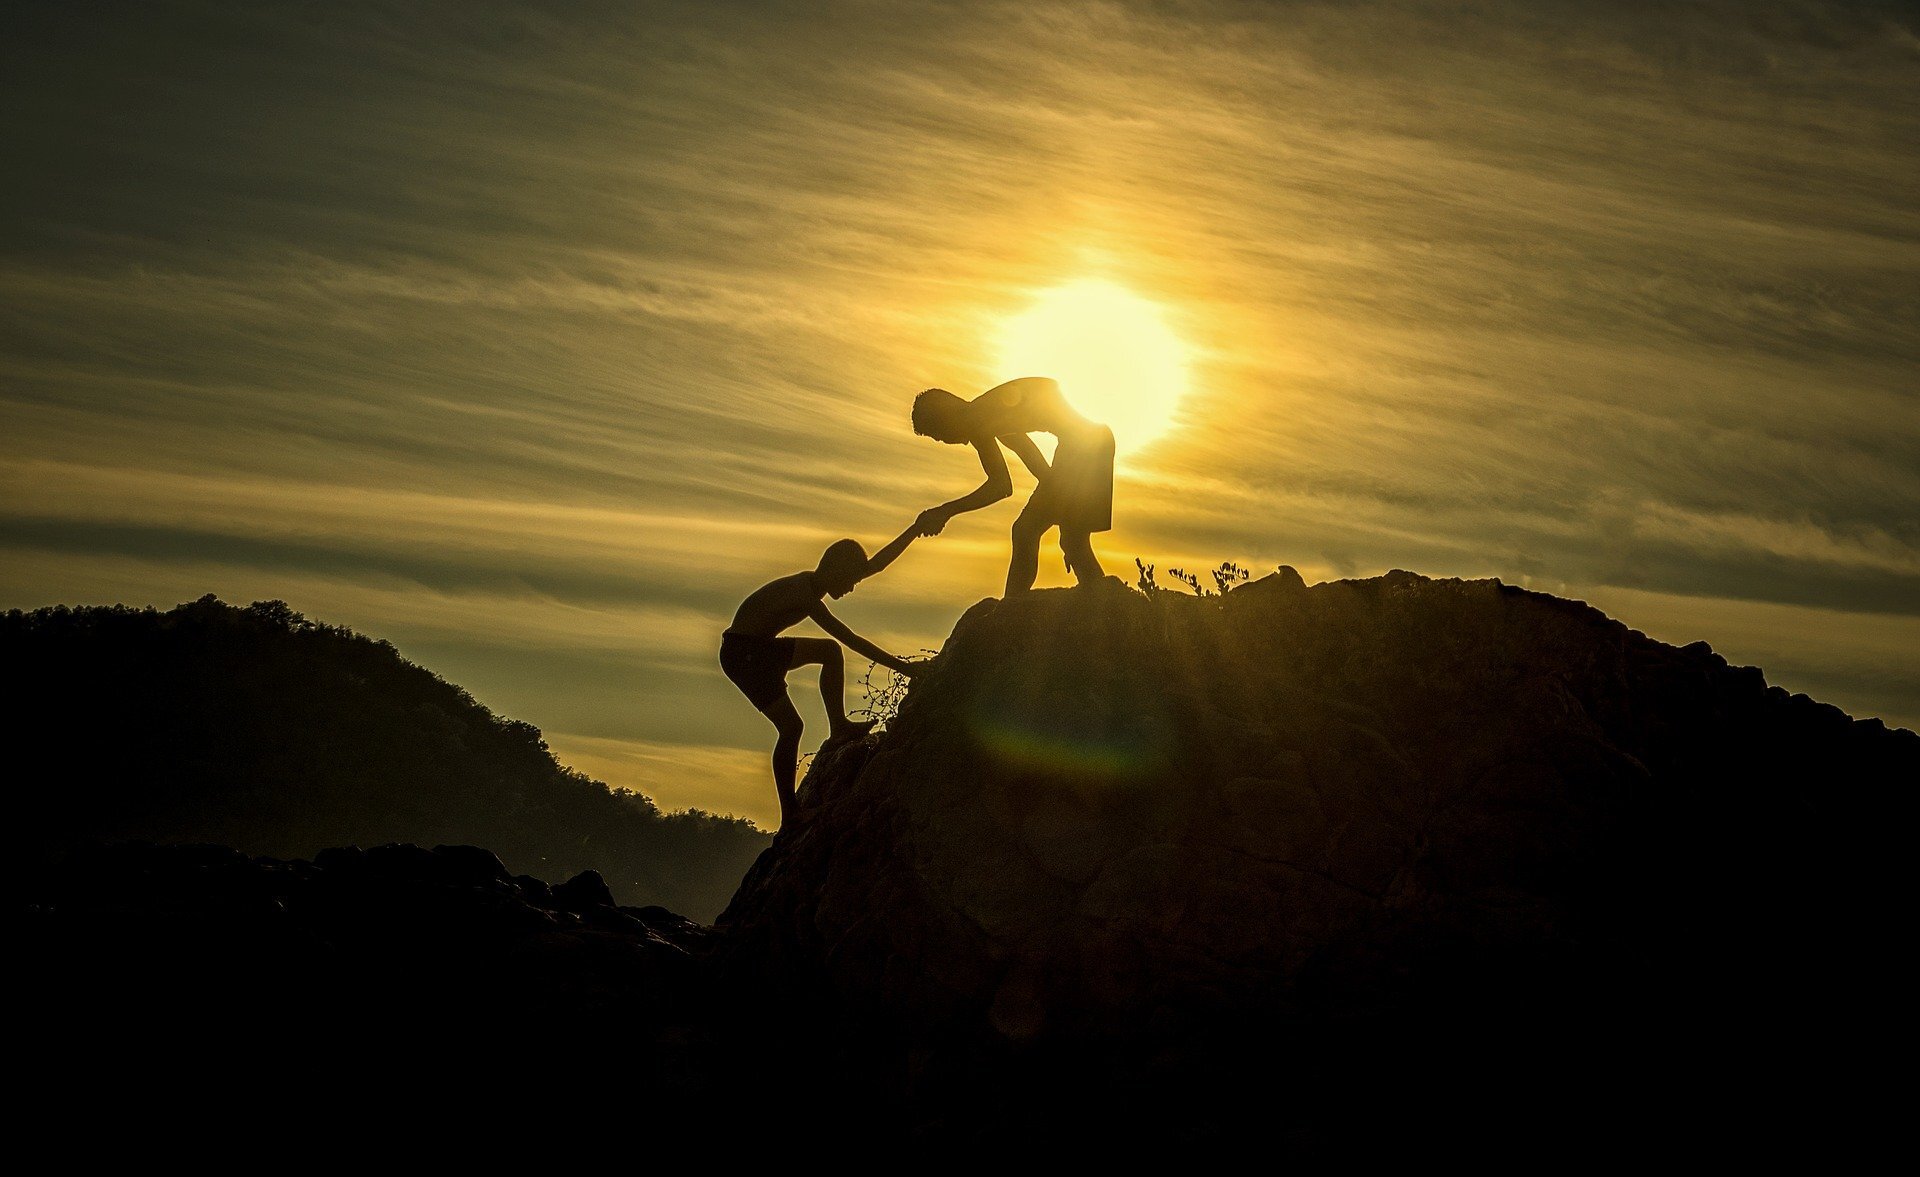 Person helps person up a hill while the sun sets behind them